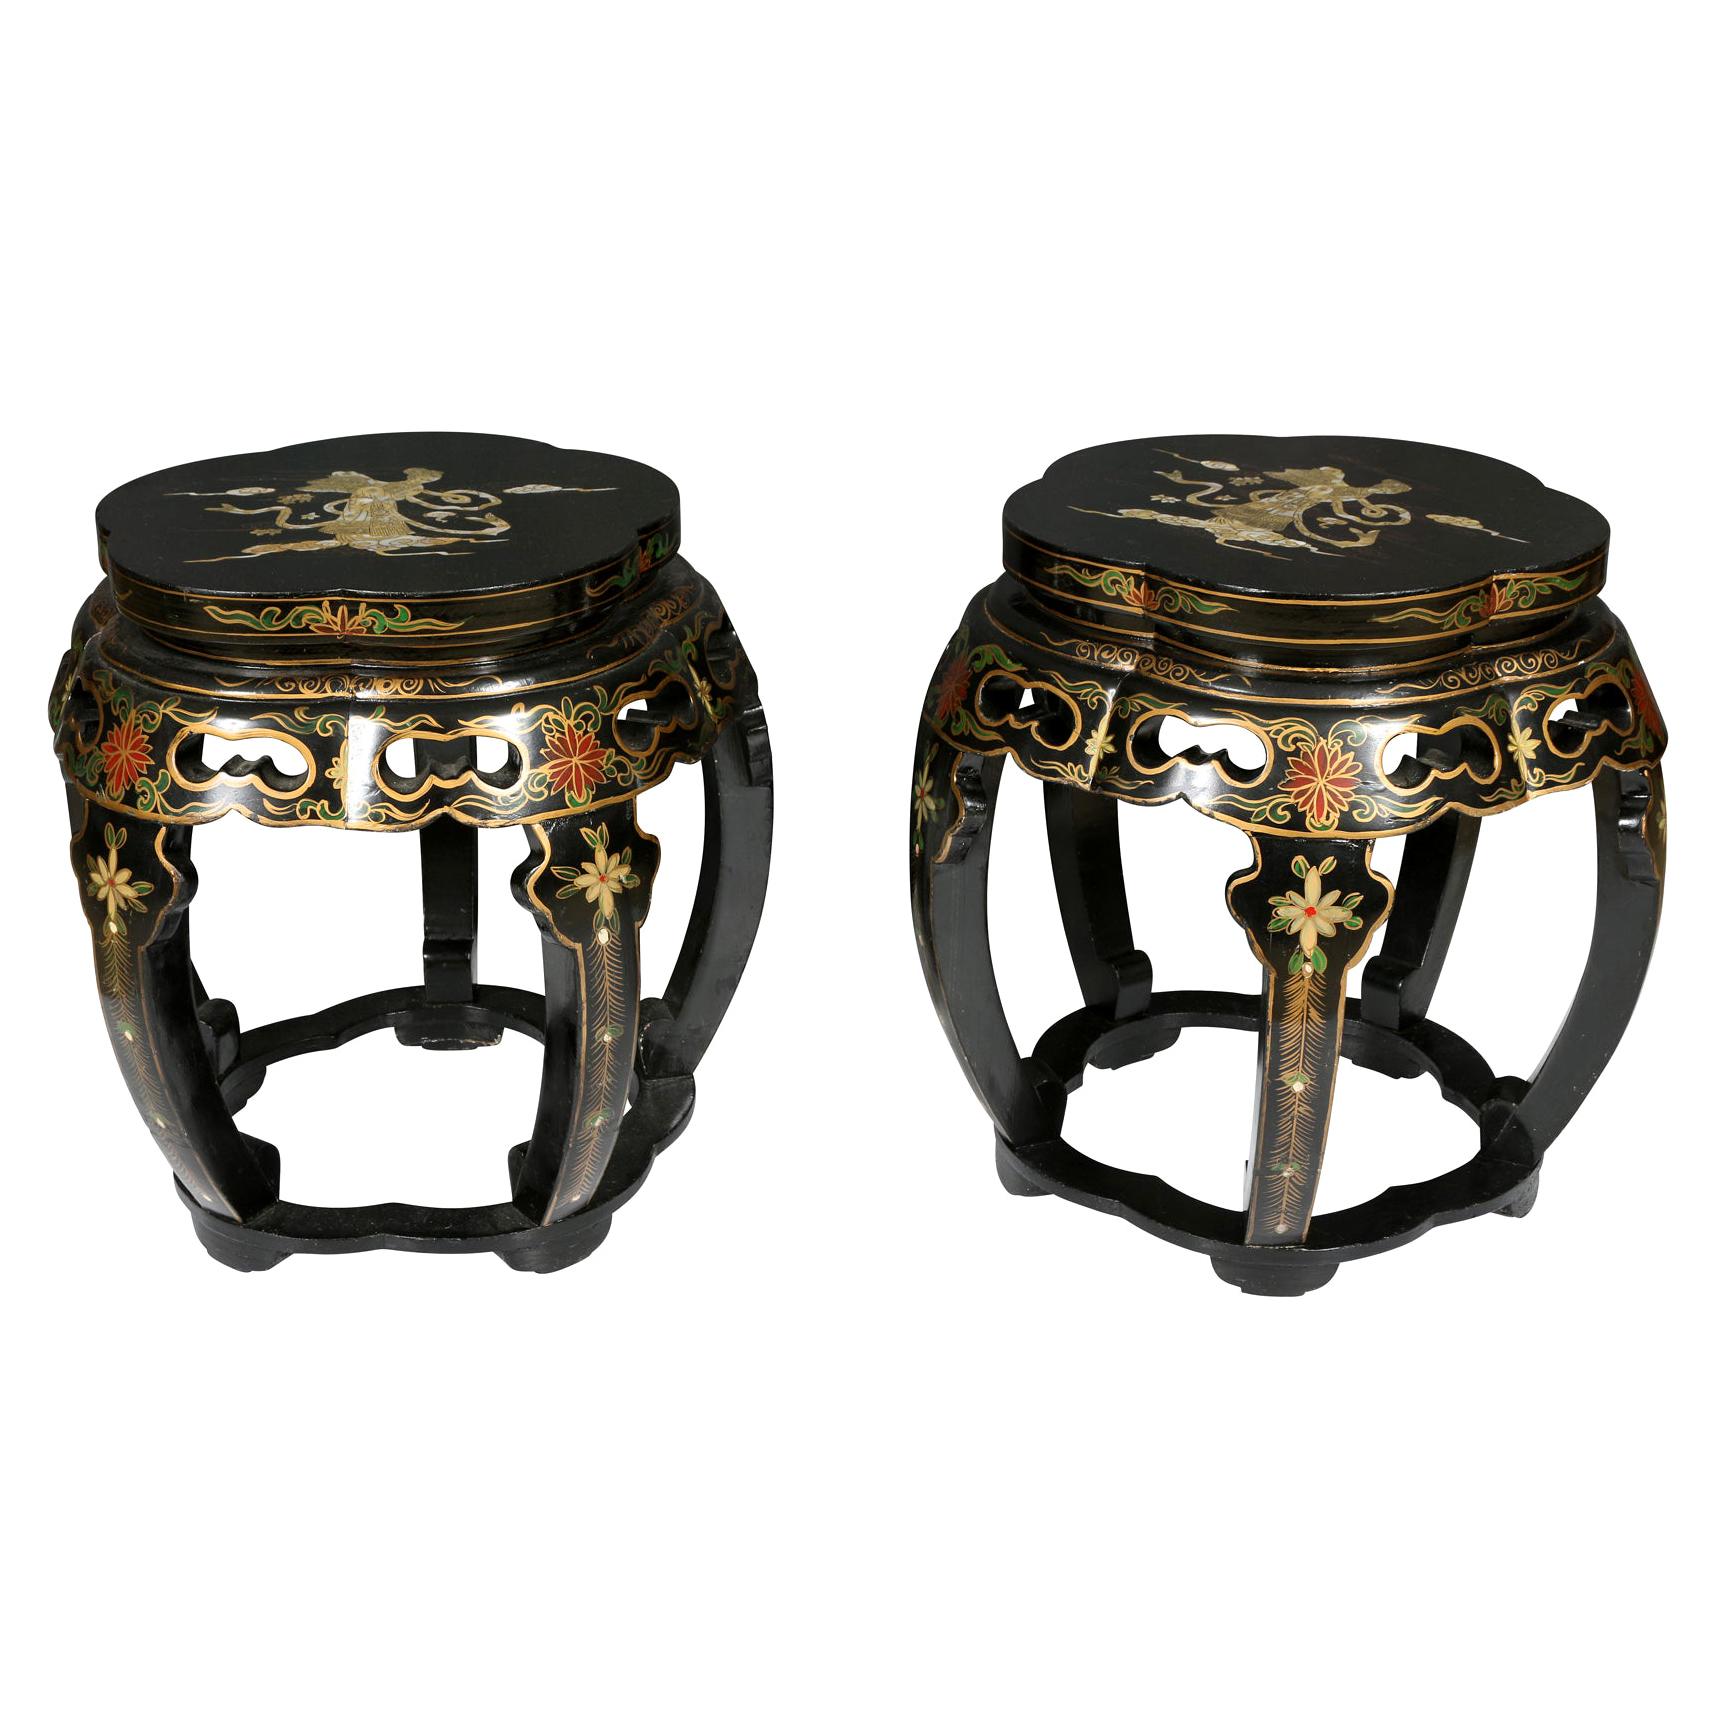 Pair of Black Lacquered Mother of Pearl Inlay Tabourets